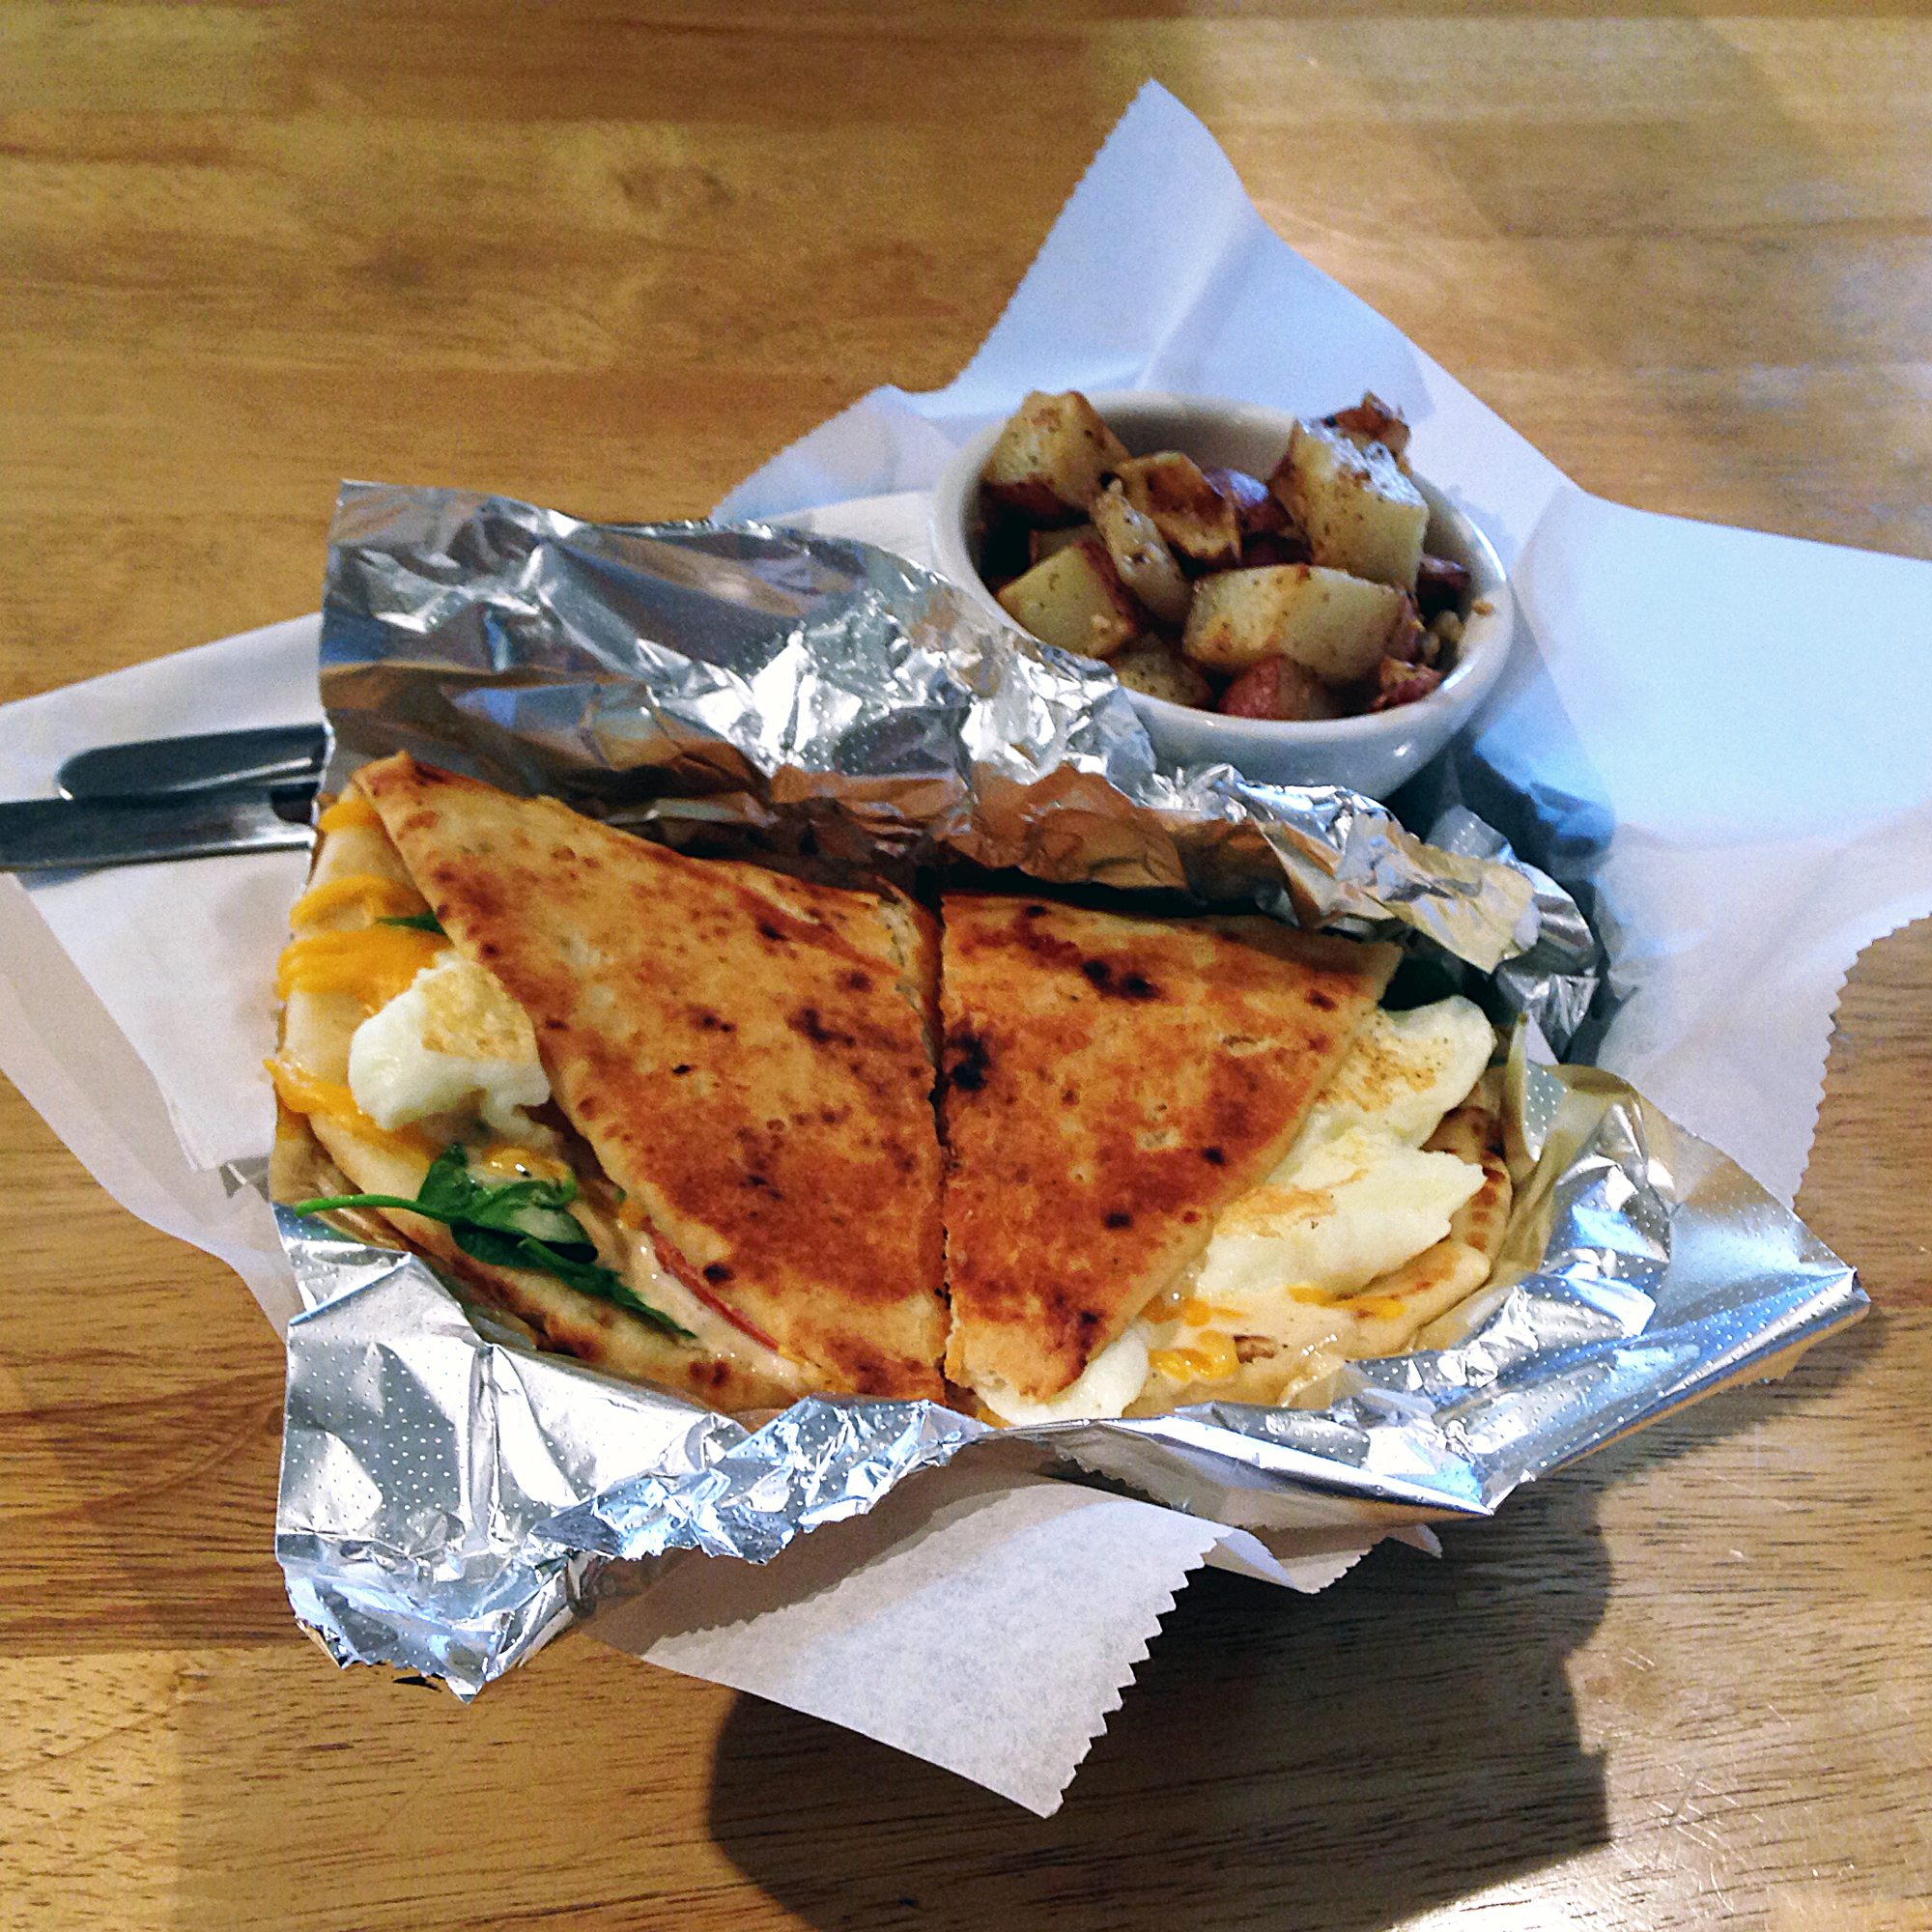 The breakfast naan quesadilla at Earth Friends Cafe